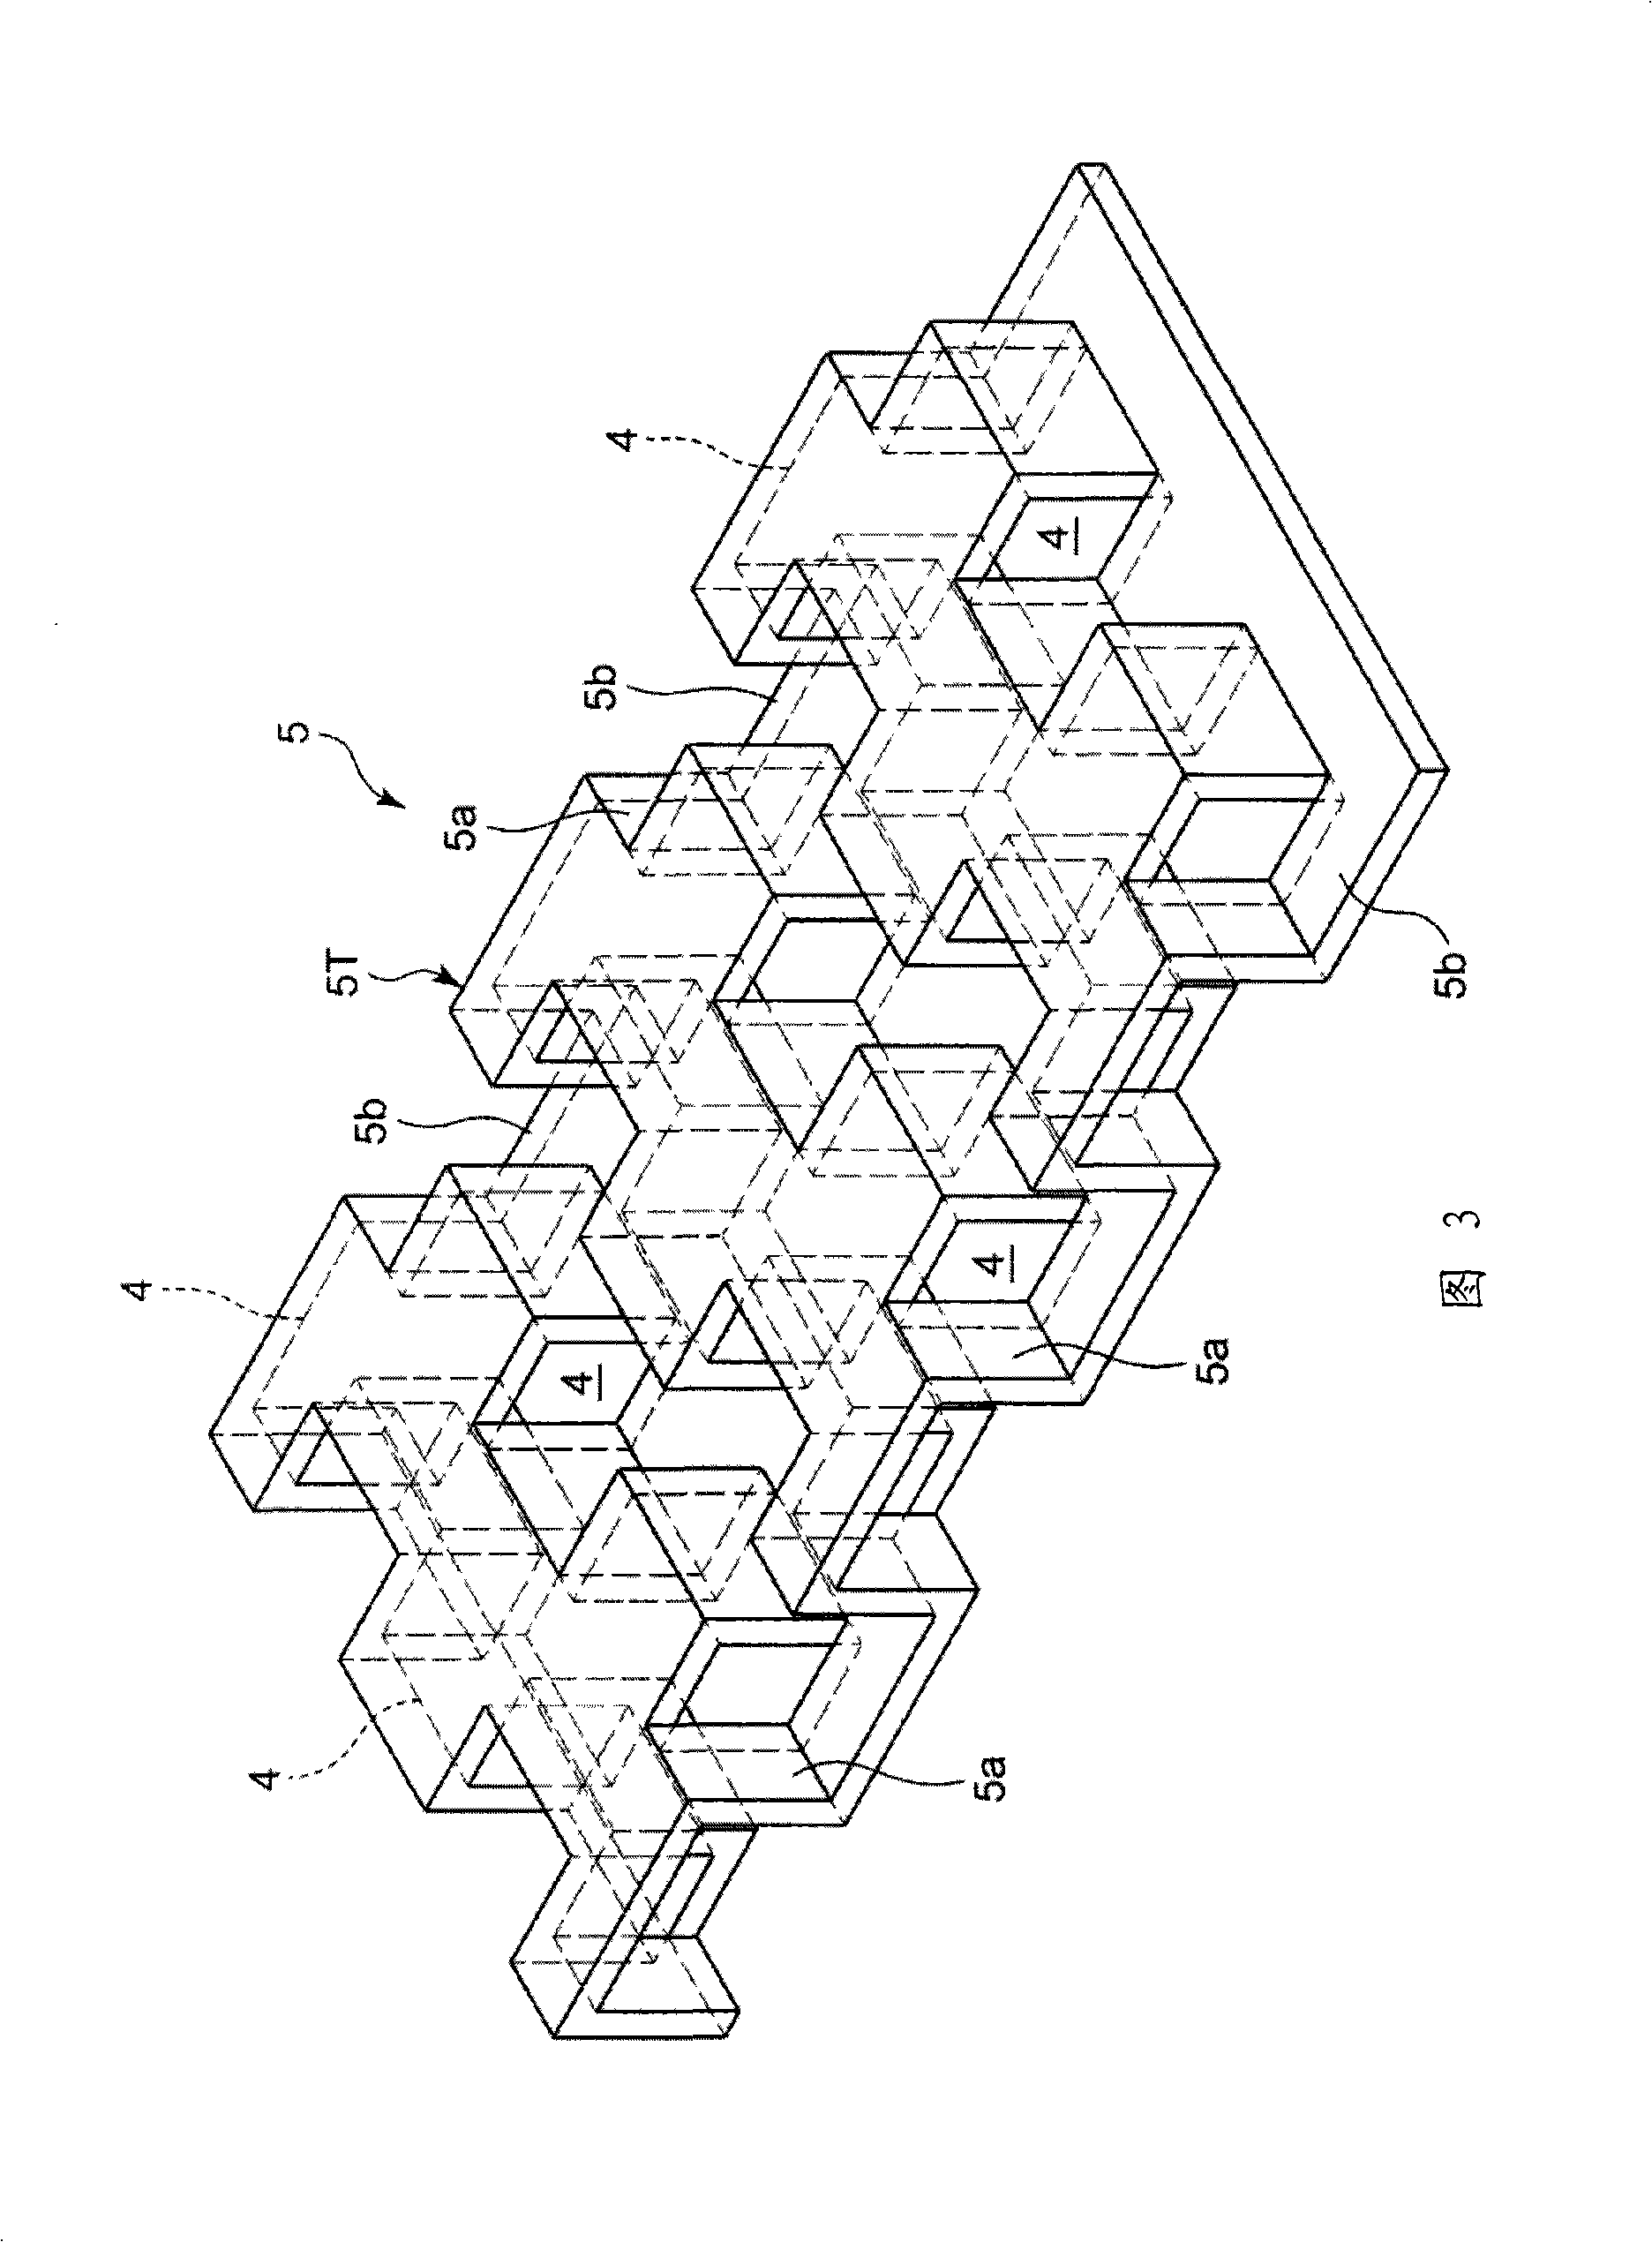 Heat exchanger and method for manufacturing same